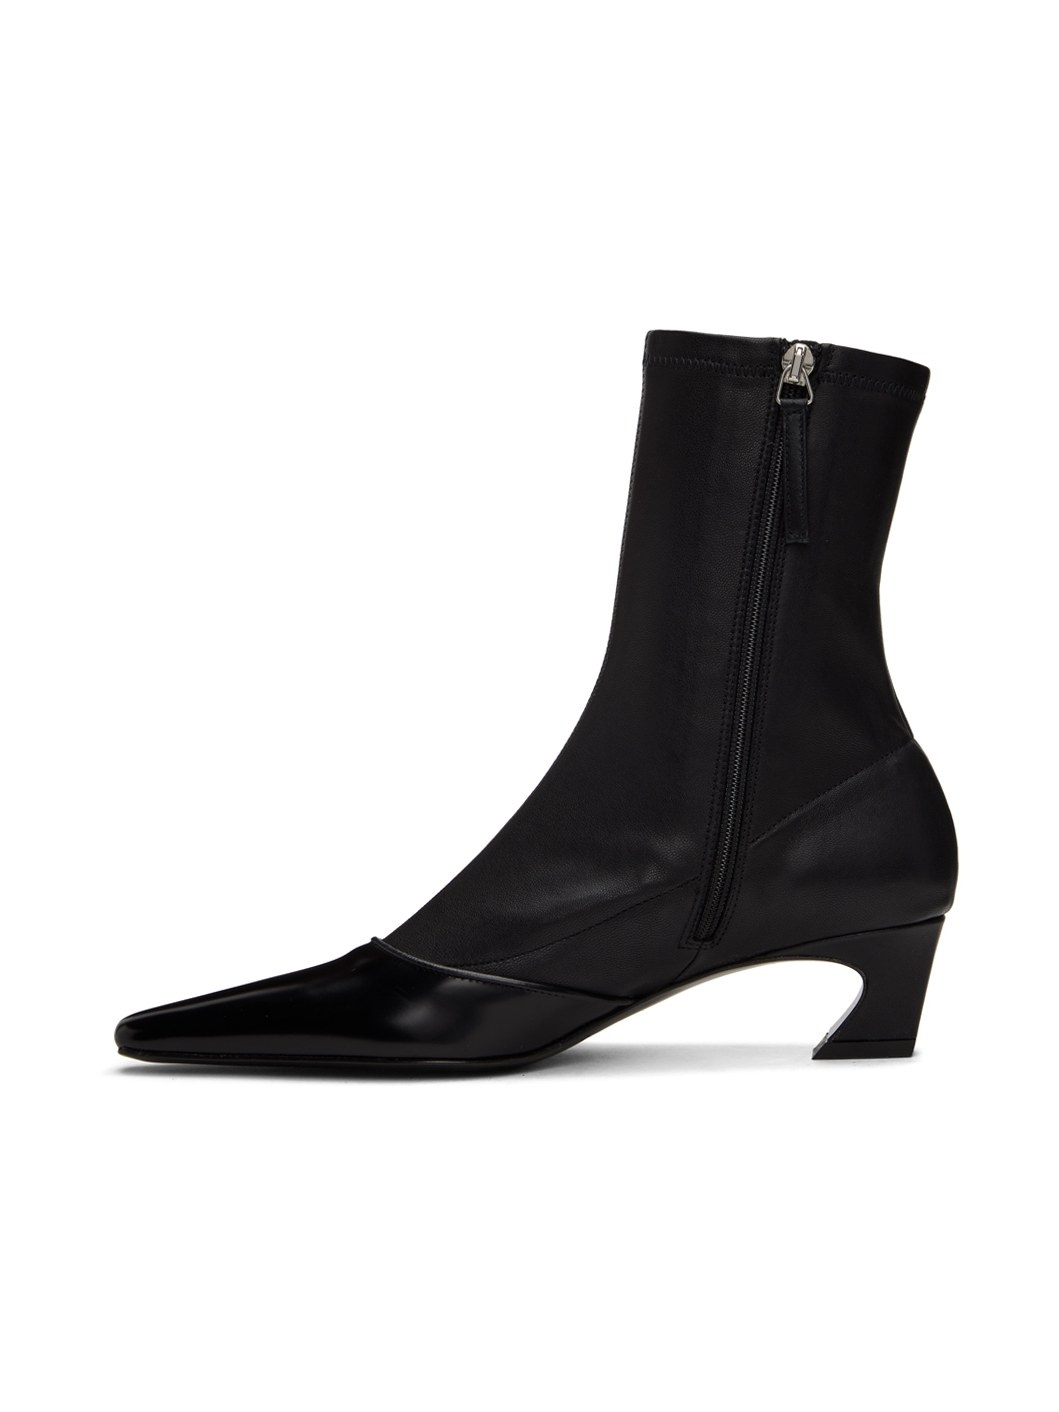 Black Heeled Ankle Boots - 3